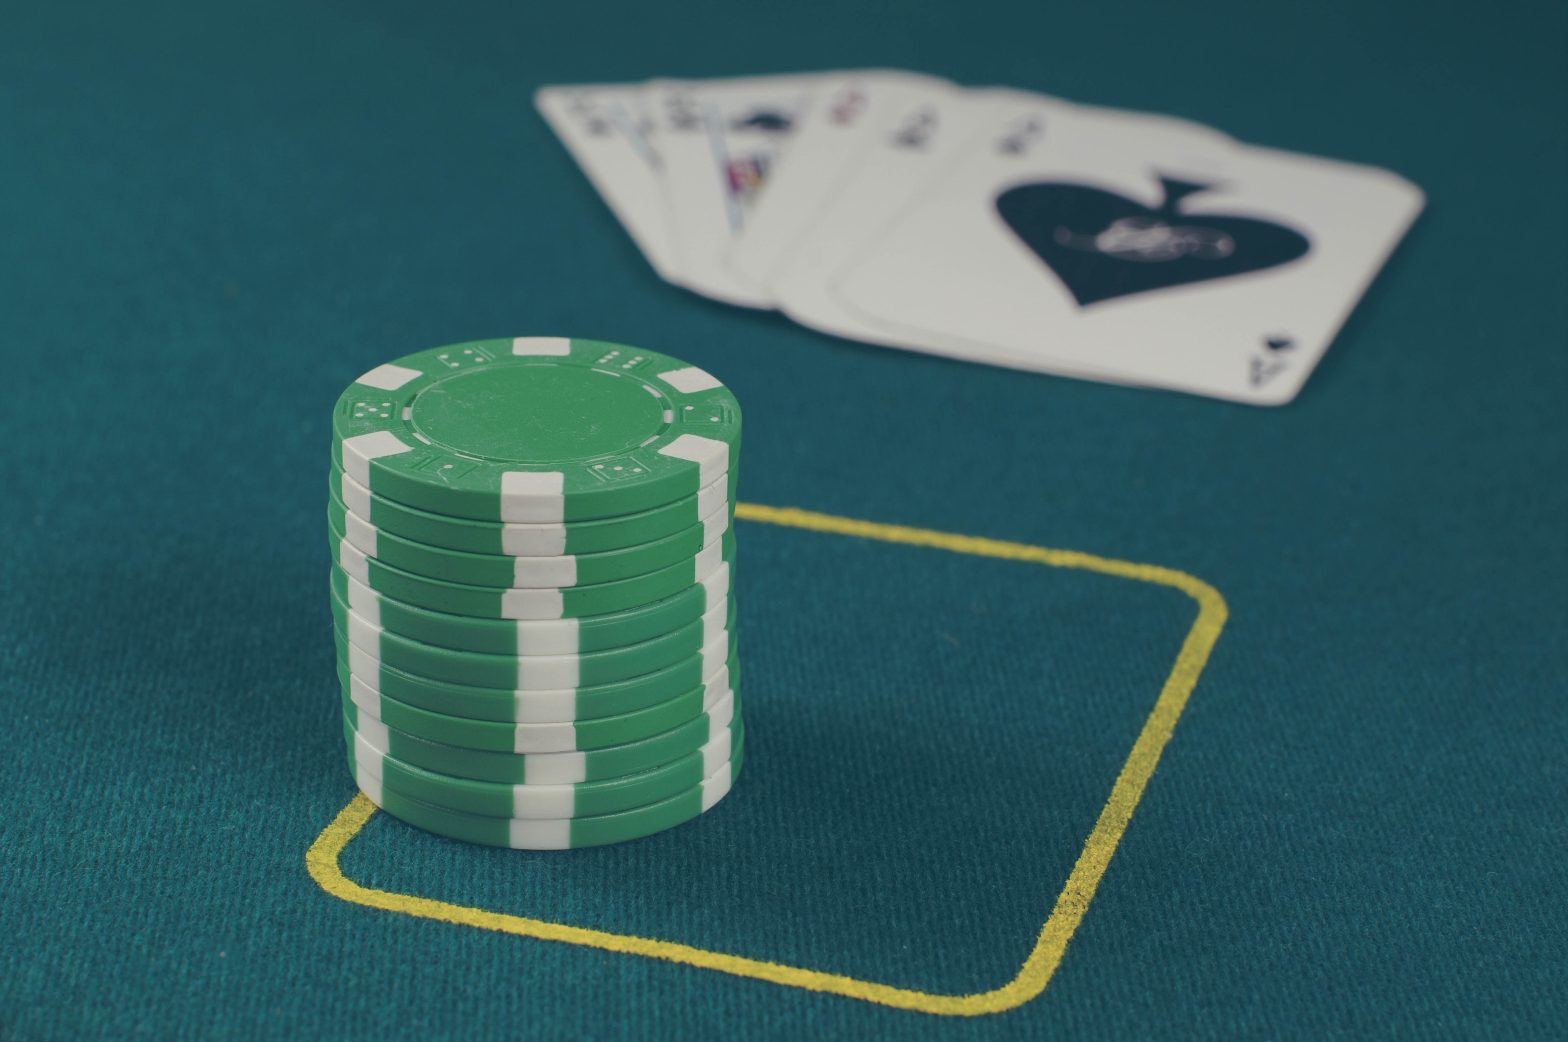 The basics and tips for beginners at online blackjack